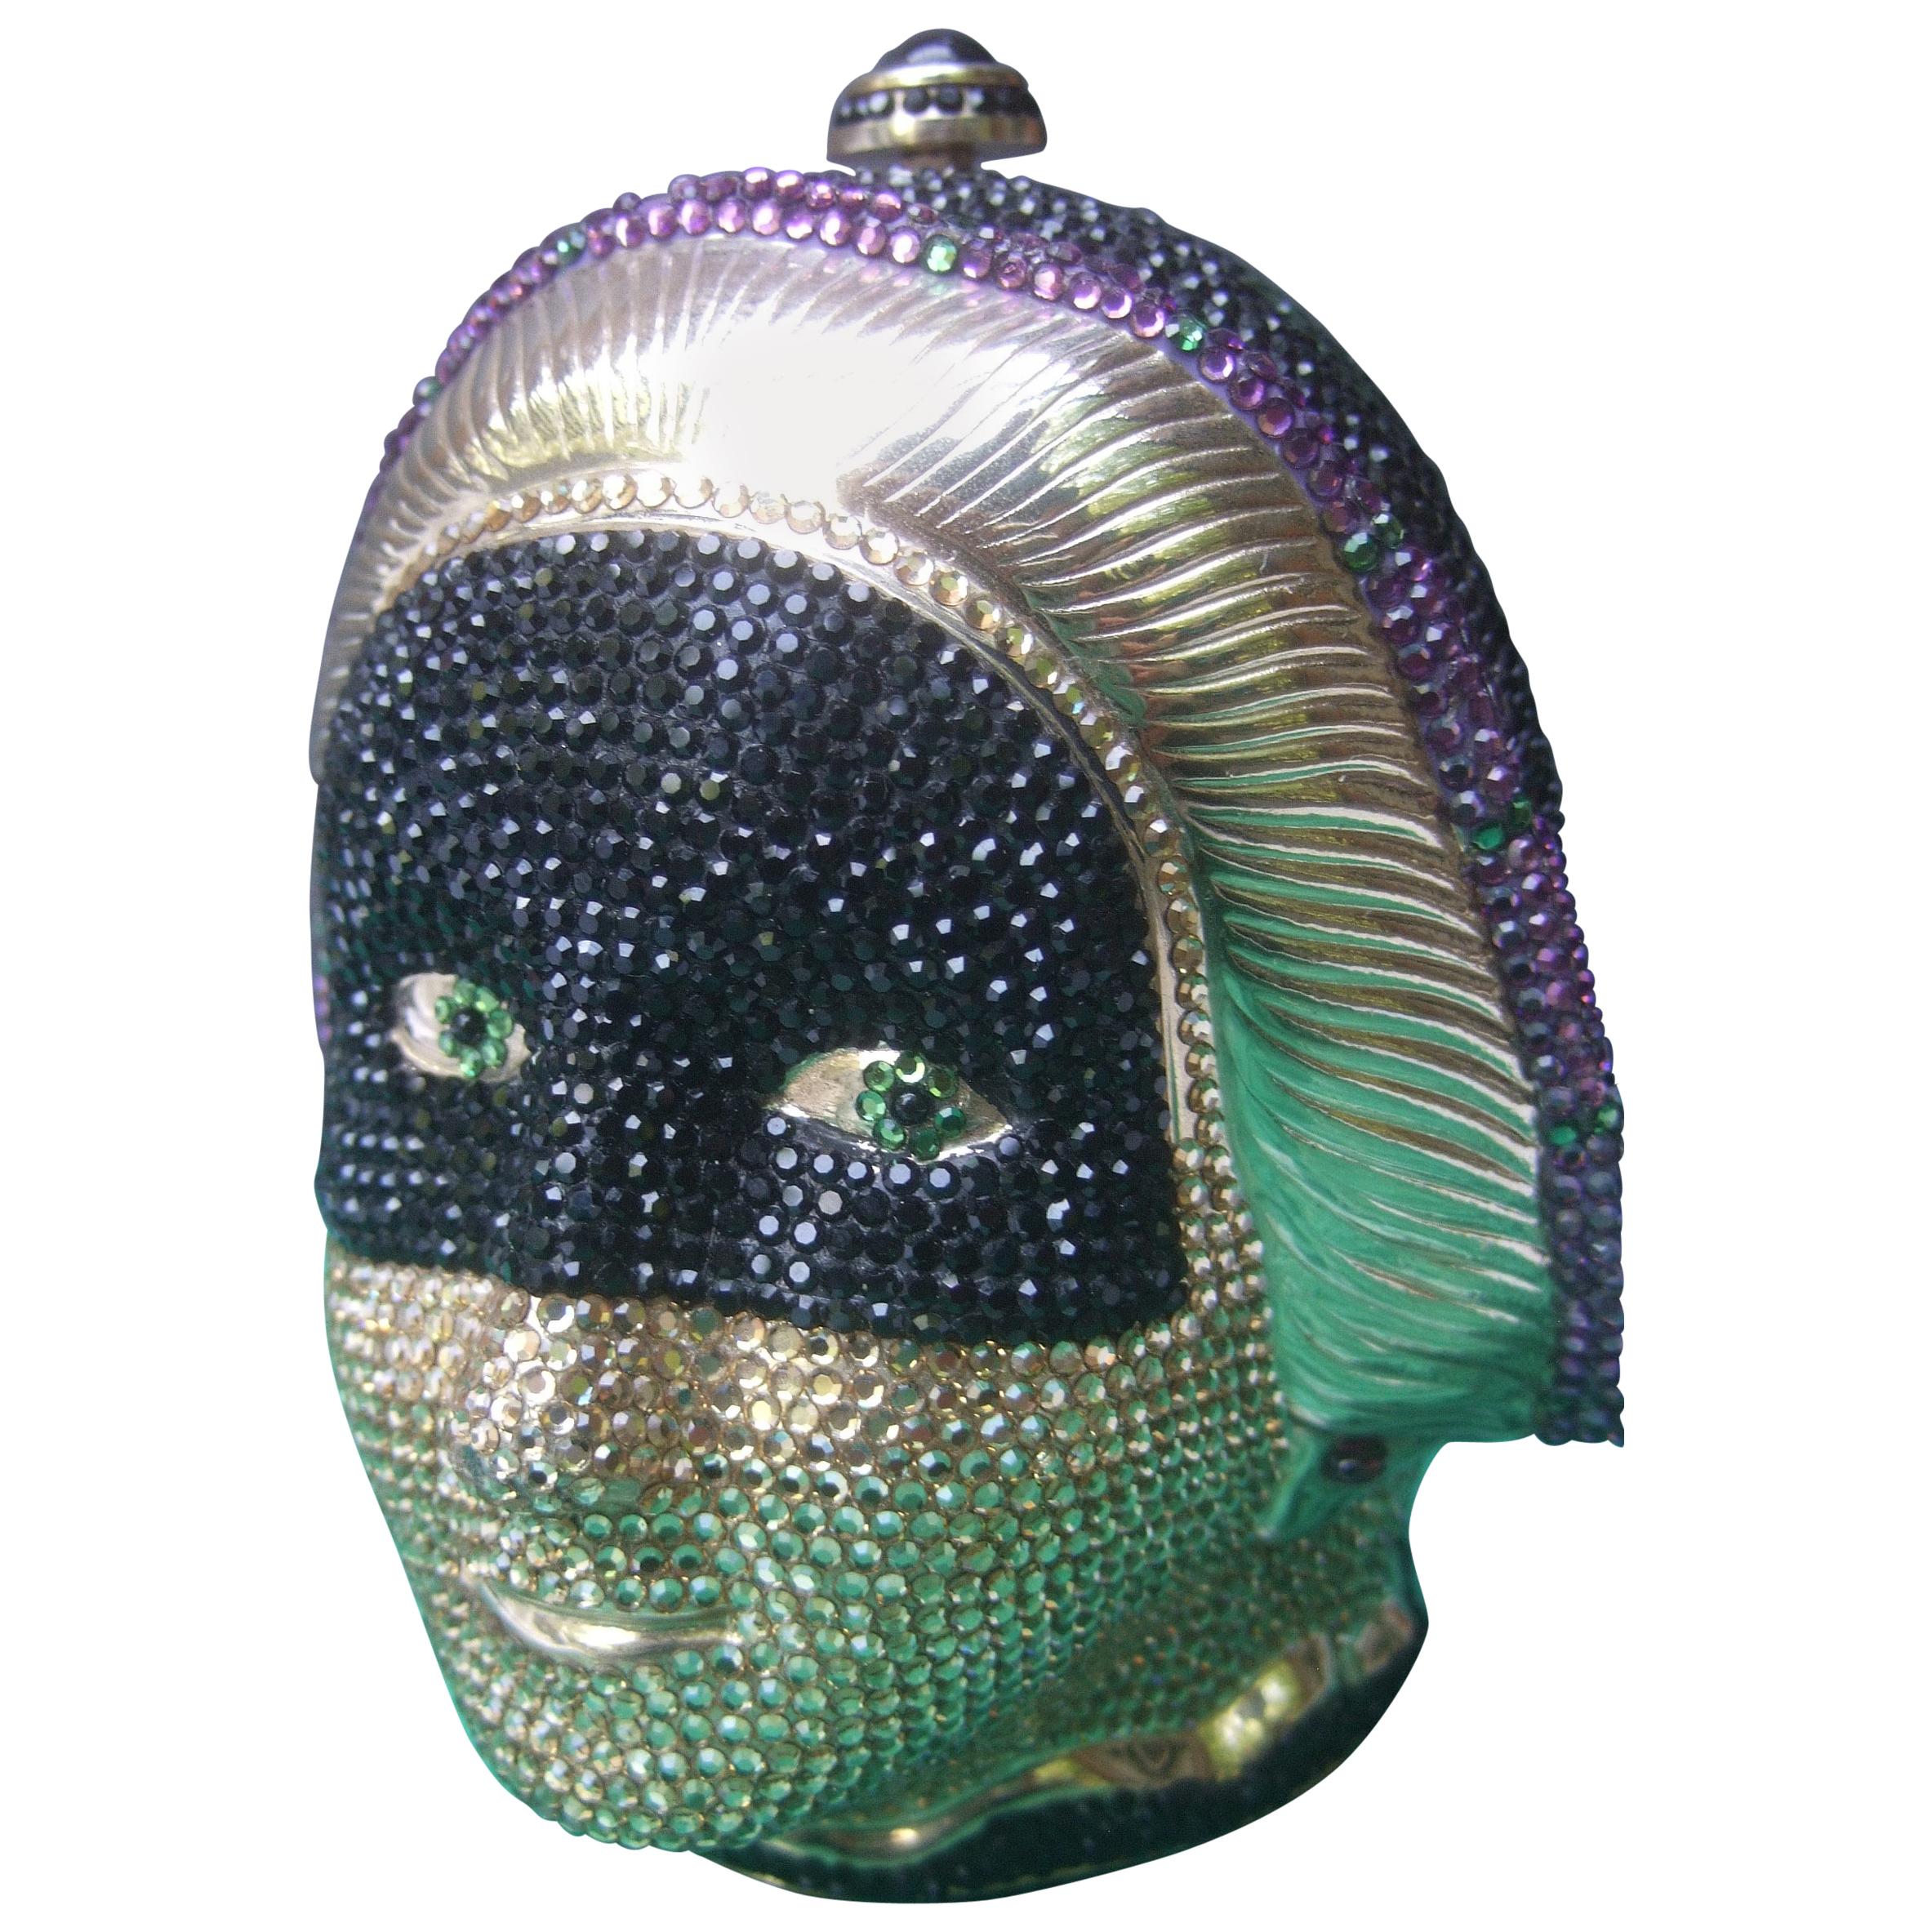 Judith Leiber Exquisite Crystal Encrusted Figural Woman Minaudière circa 1980s